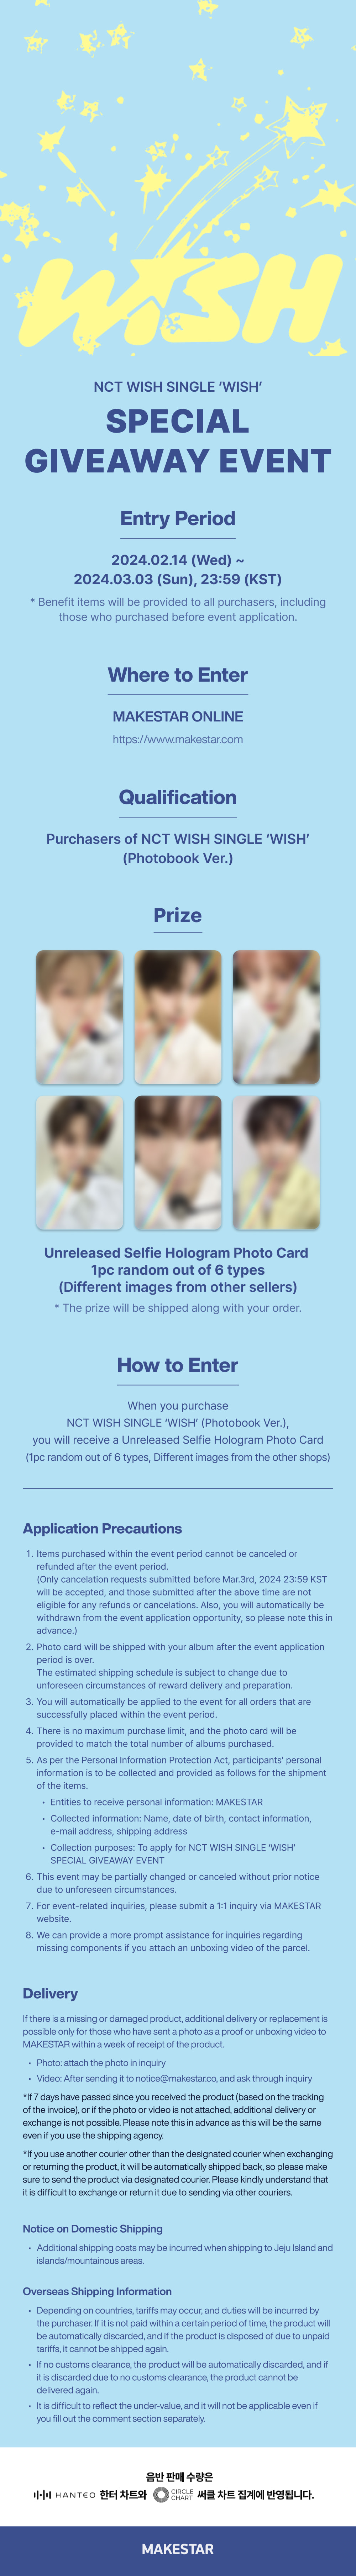 NCT WISH SINGLE 'WISH' SPECIAL GIVEAWAY EVENT | MAKESTAR